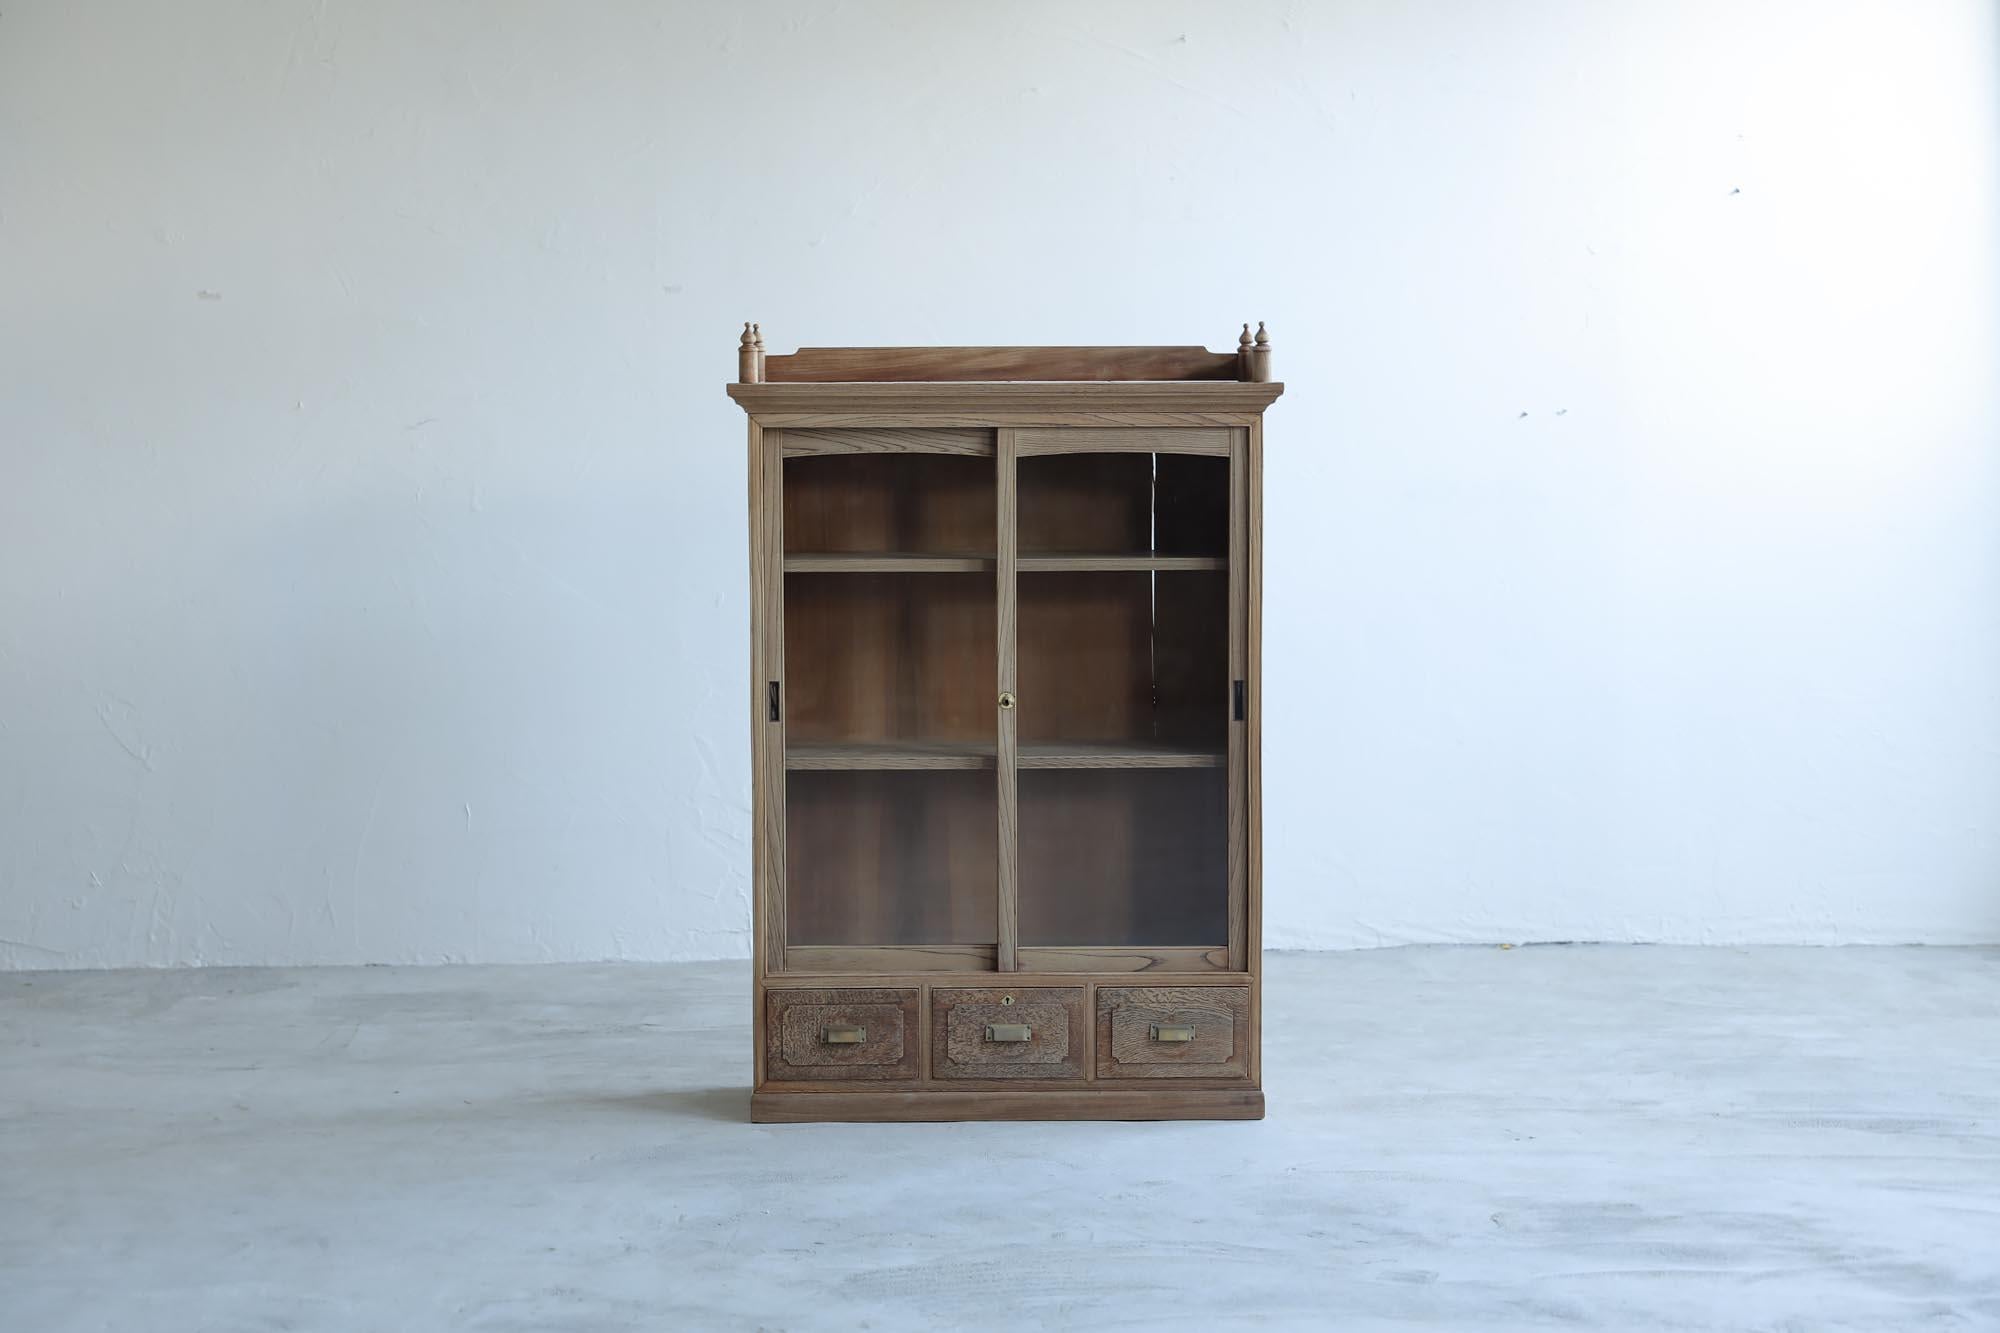 This is an antique Japanese cabinet made during the Taisho period.

This furniture was made with the same tradition and advanced techniques as Japanese shrines. An advanced joining technique called ken-dome (sword clasp) is used to beautifully